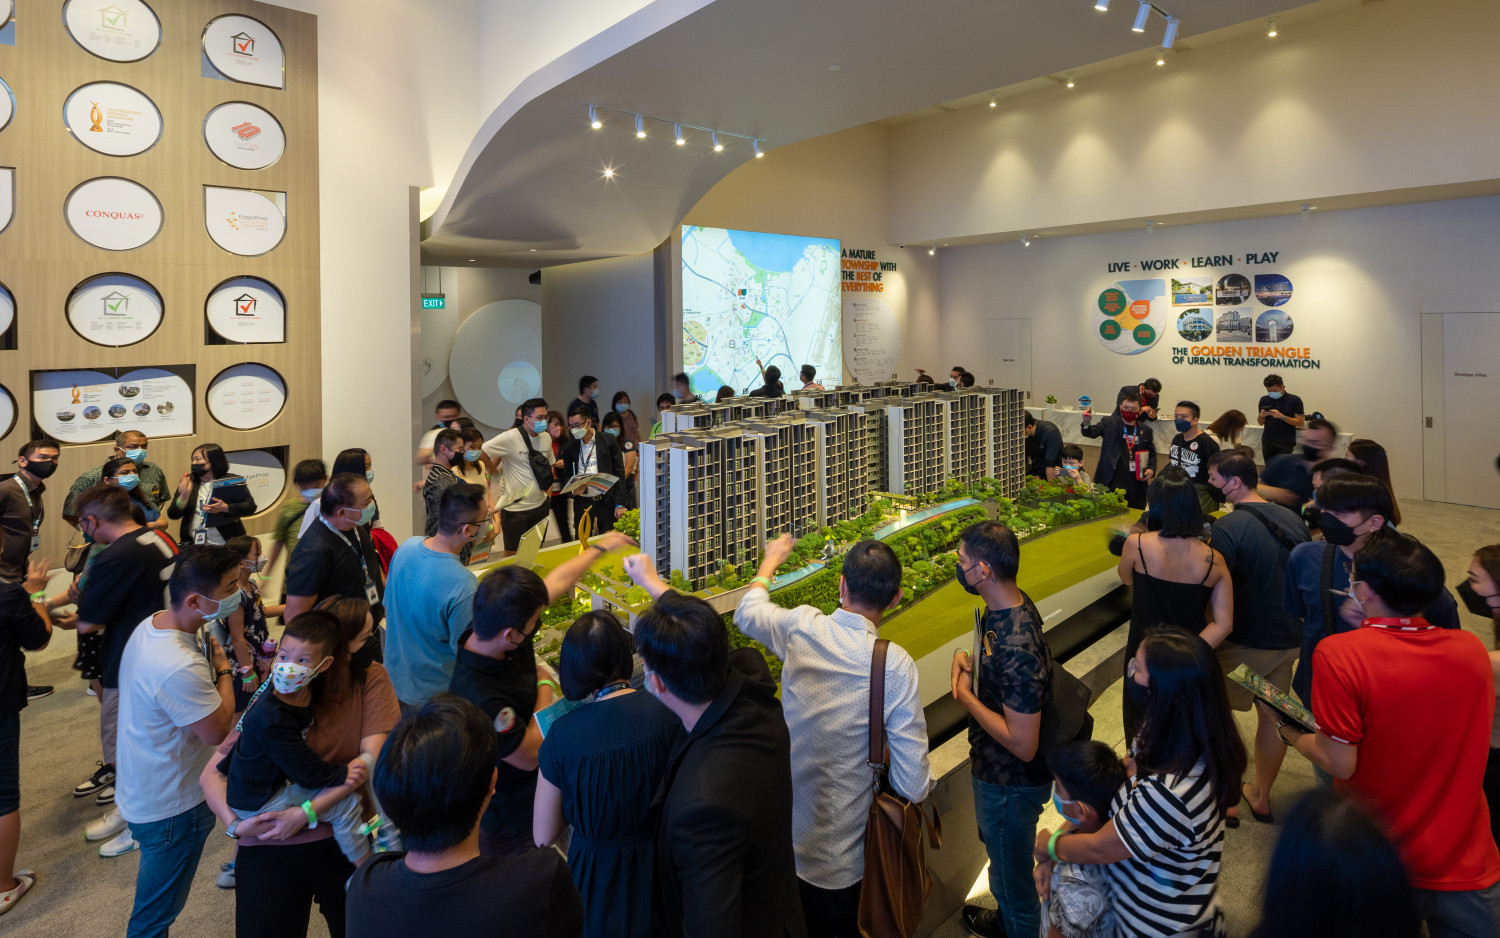 Tenet EC weekend preview draws over 5,000 visitors - Property News